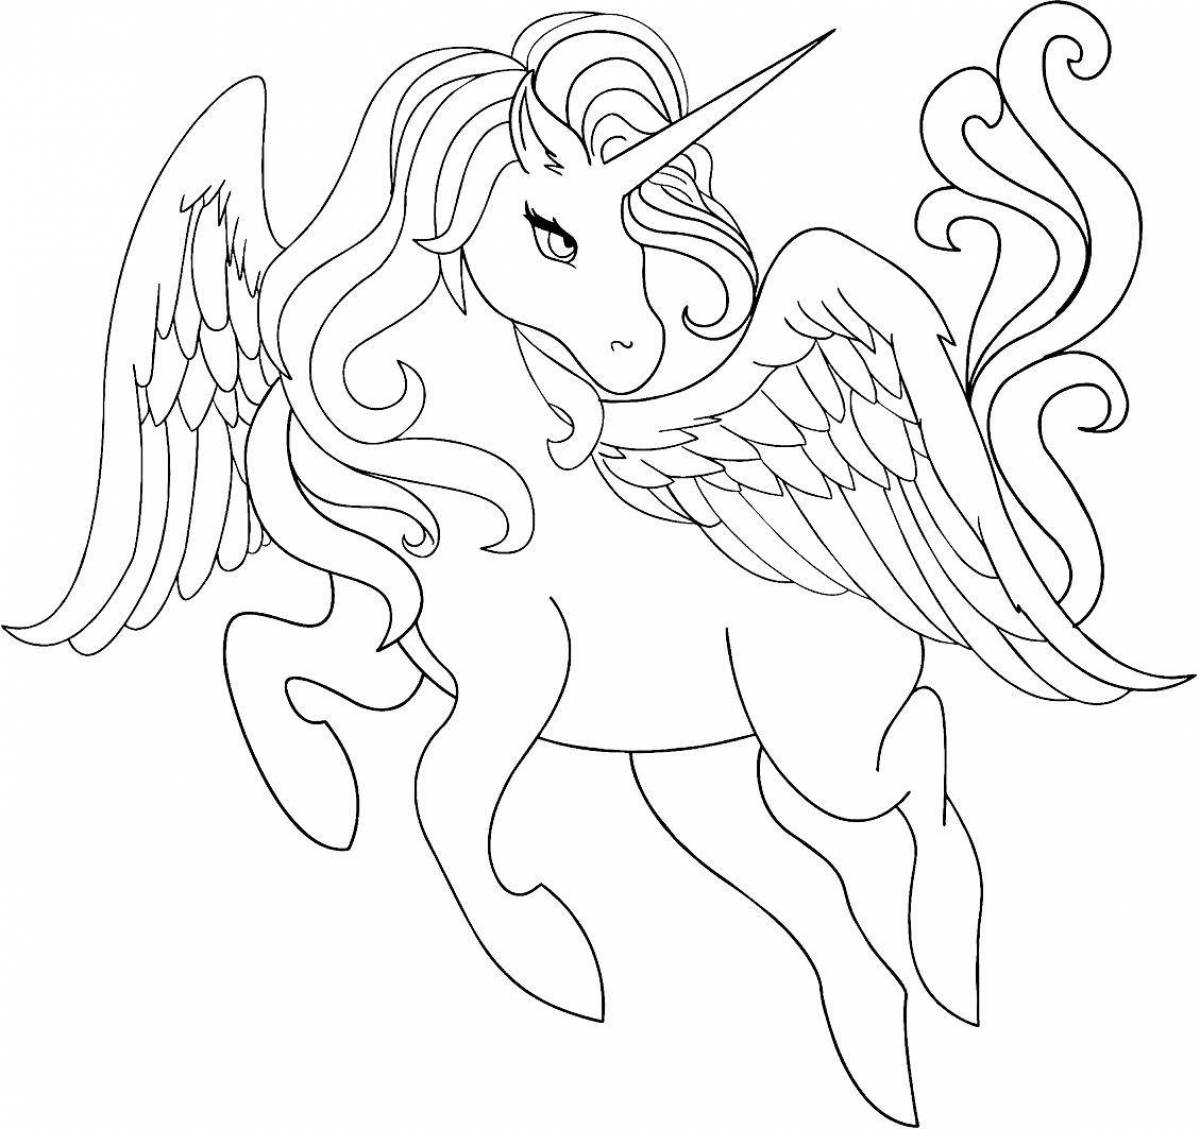 Fancy flying unicorns coloring page